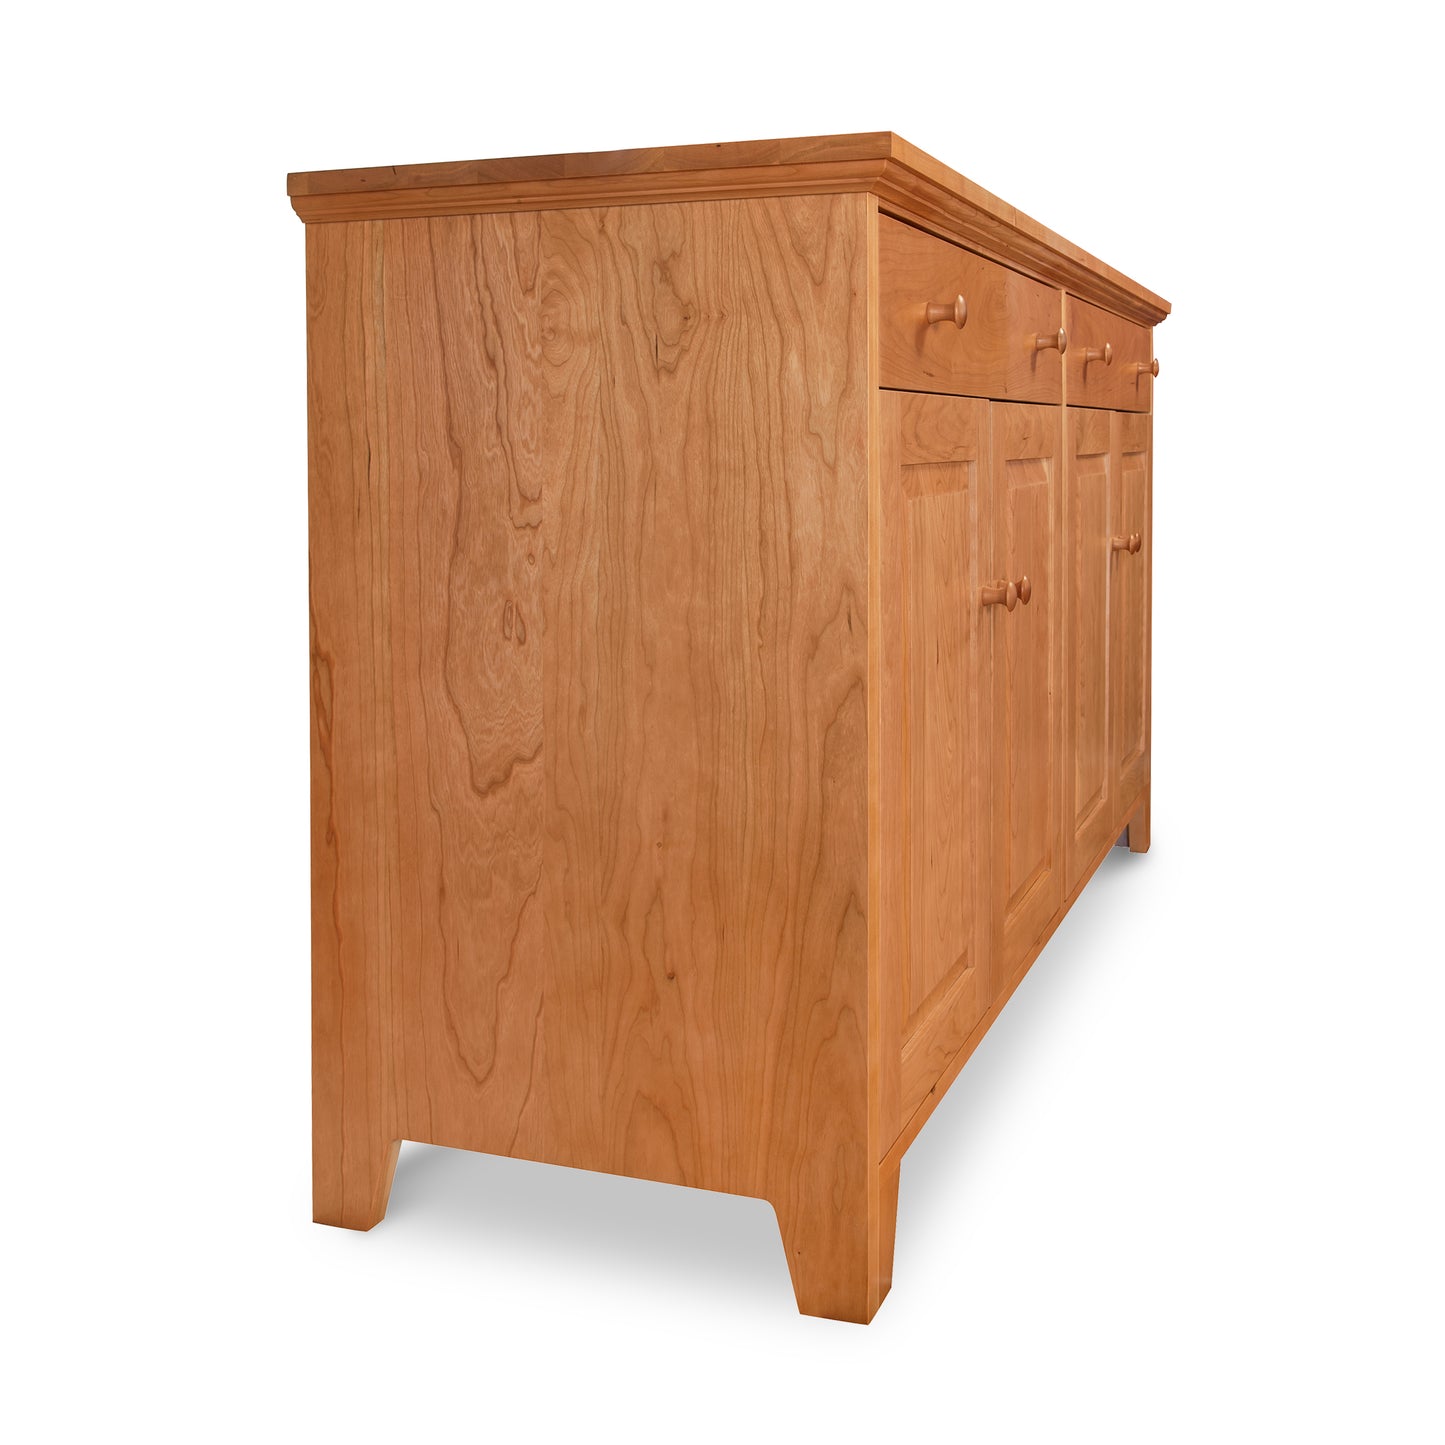 This Classic Country Buffet, crafted with Lyndon Furniture craftsmanship, features a sturdy hardwood construction. It is designed with drawers and doors for ample storage.